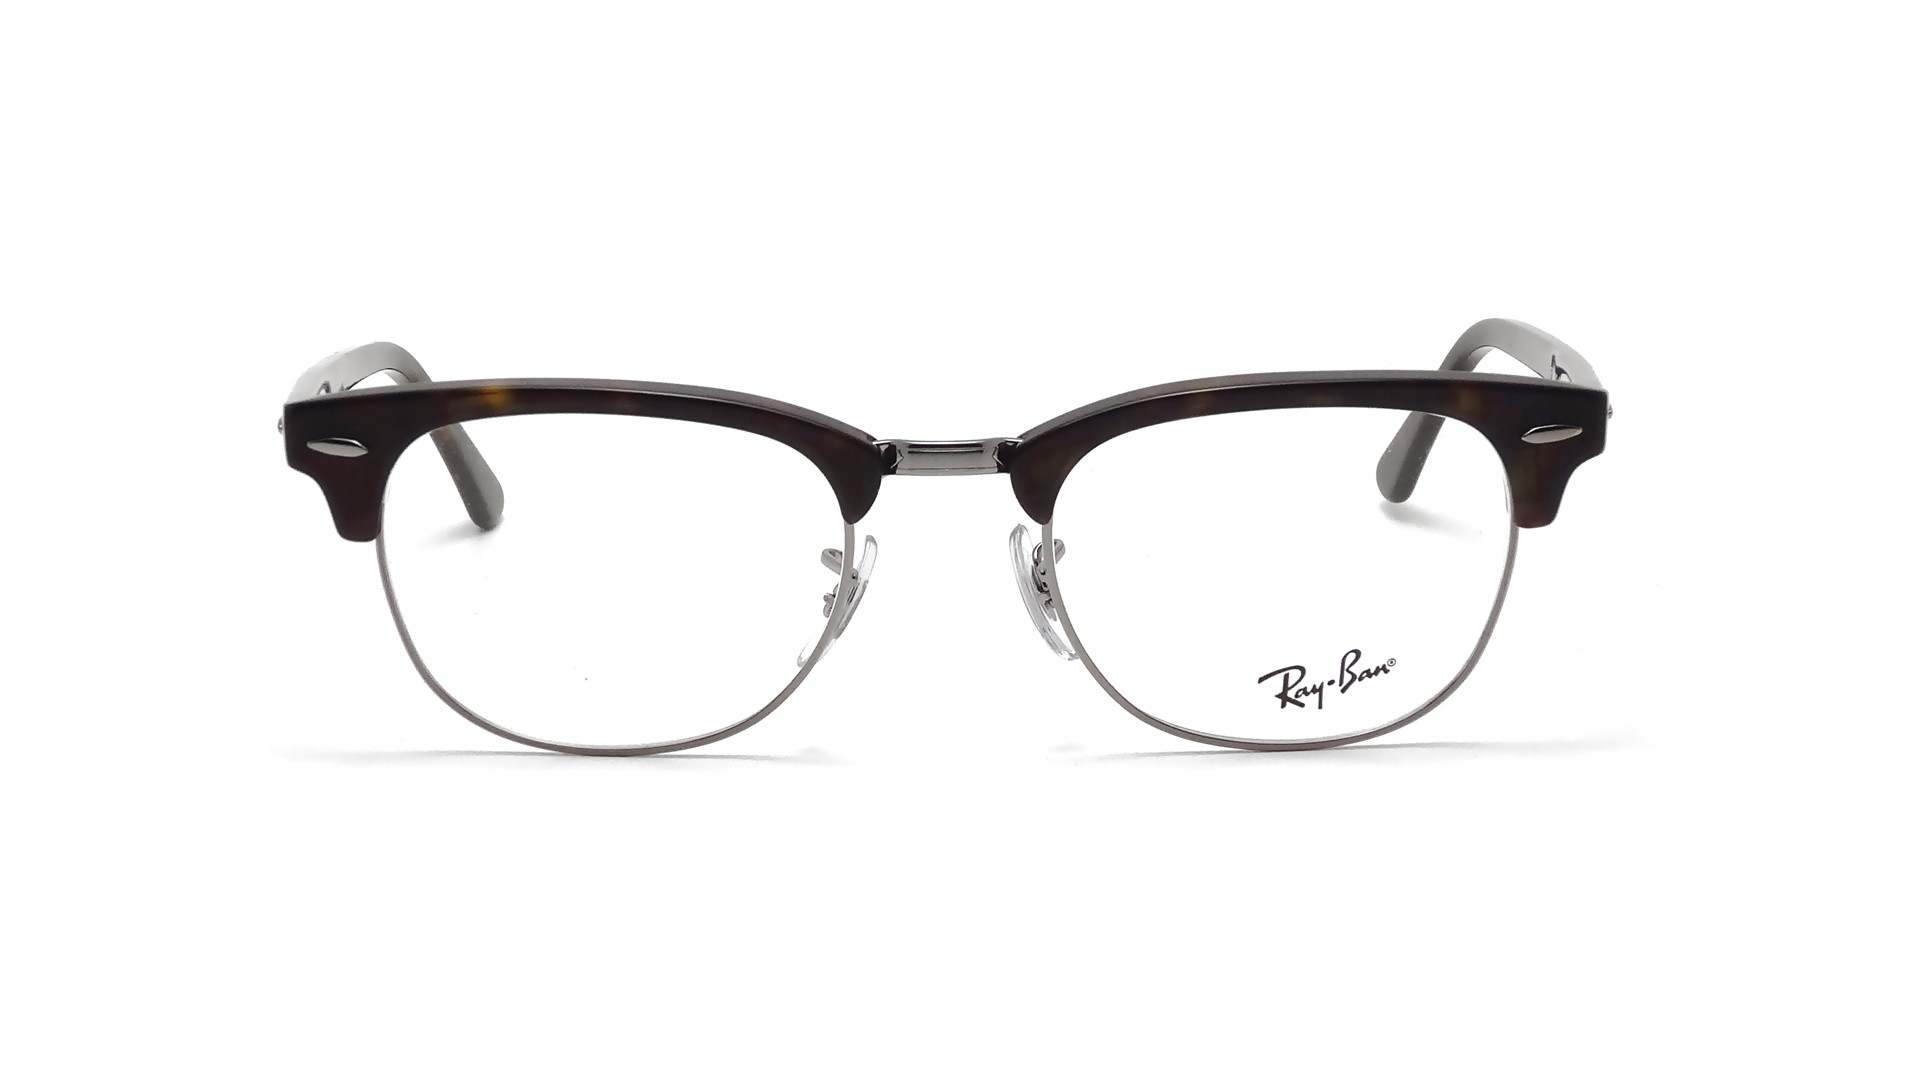 ray ban clubmaster 4921